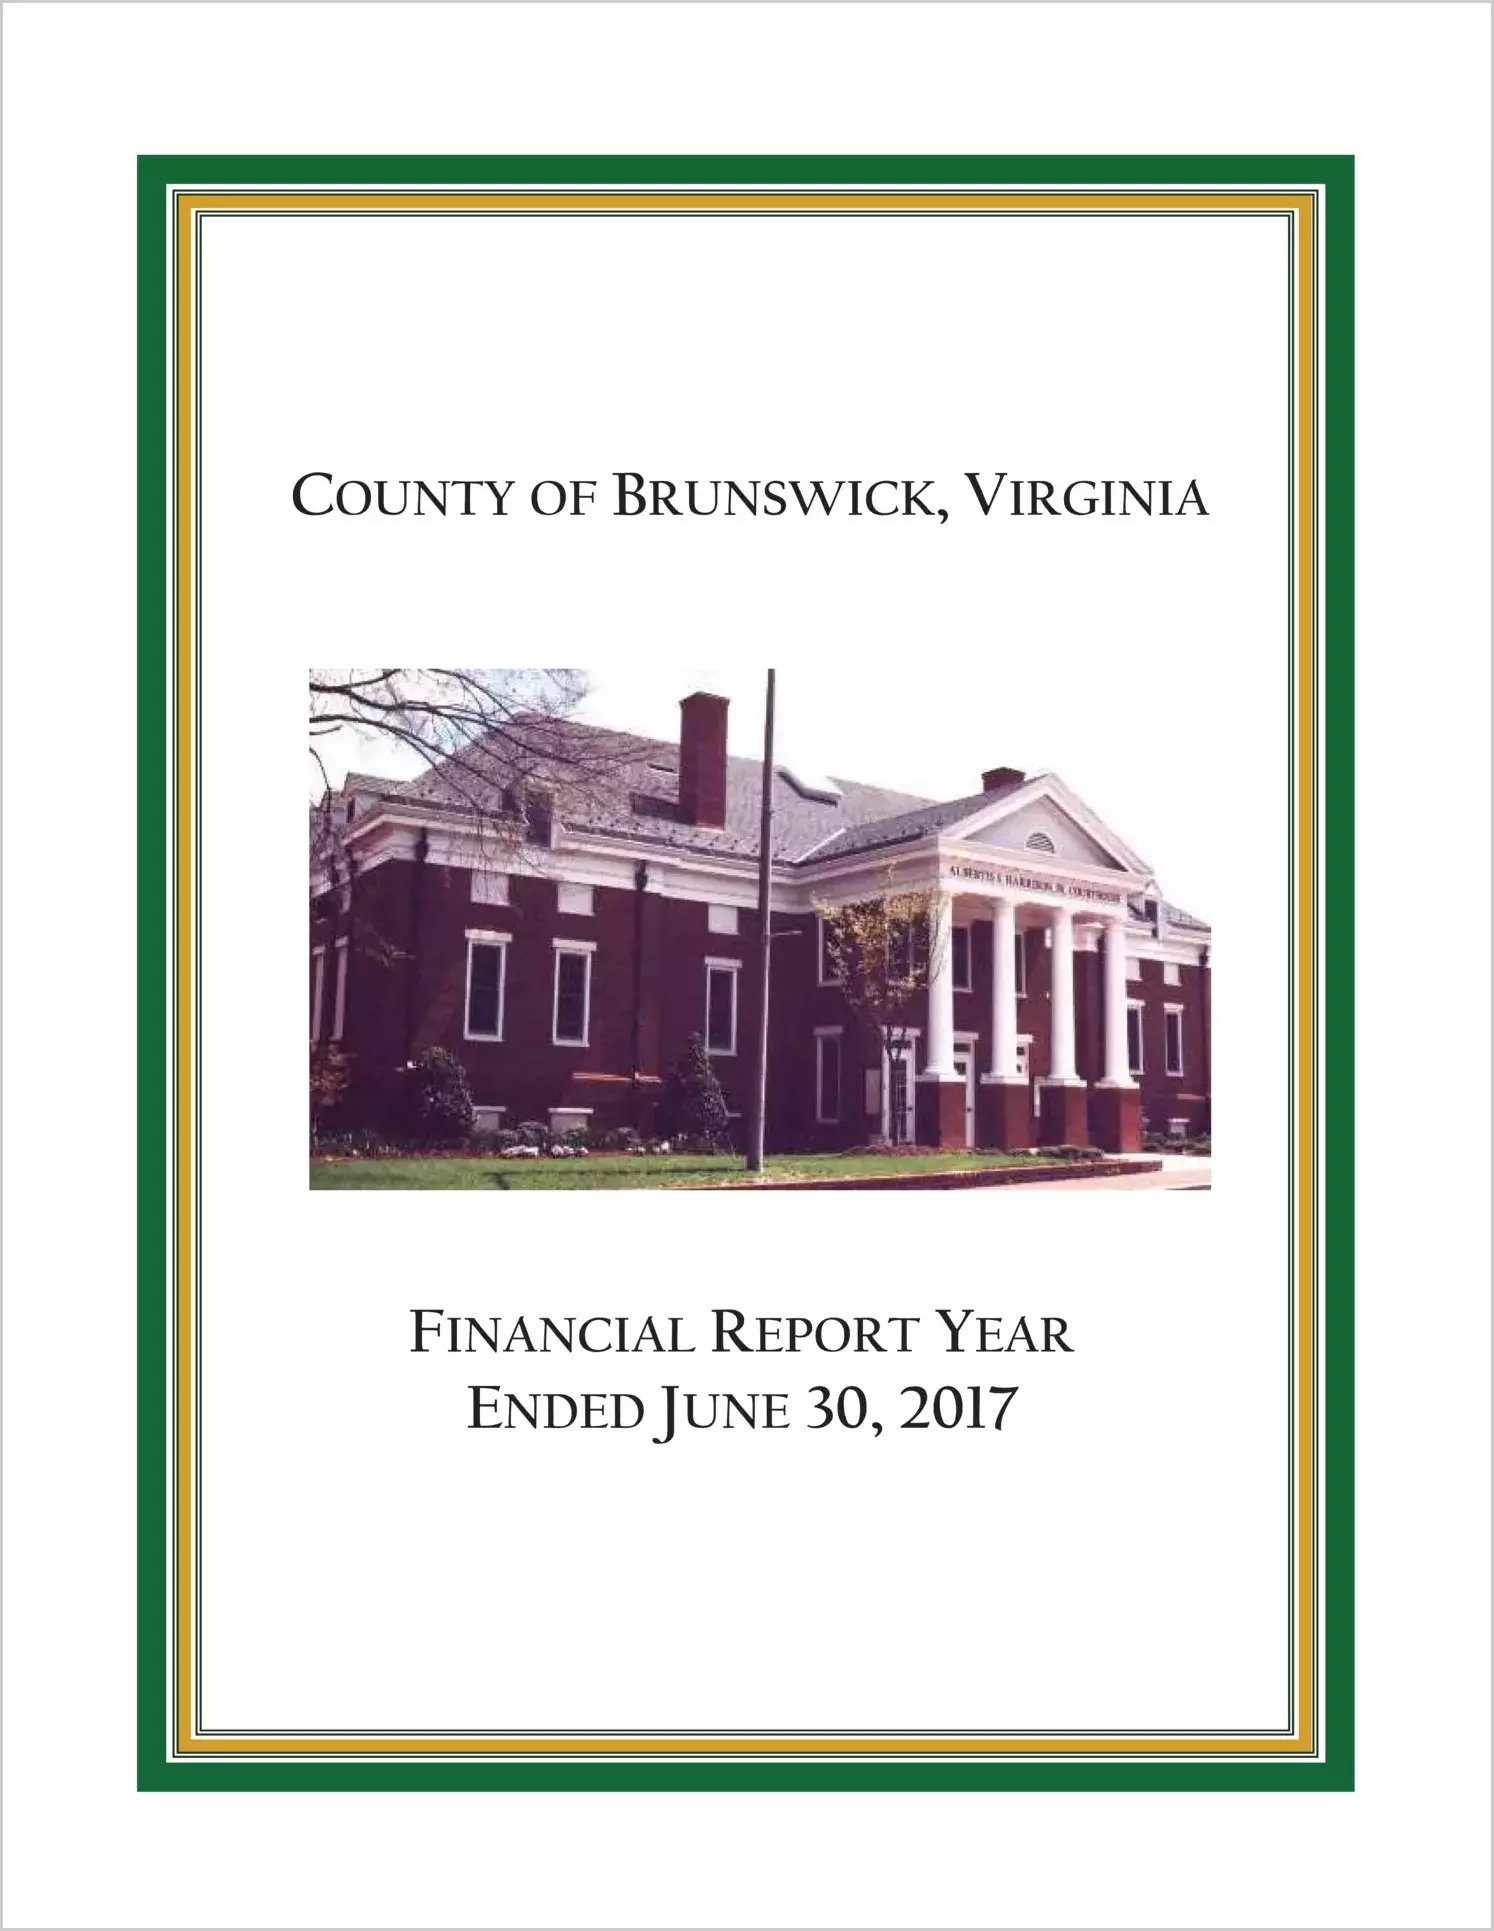 2017 Annual Financial Report for County of Brunswick